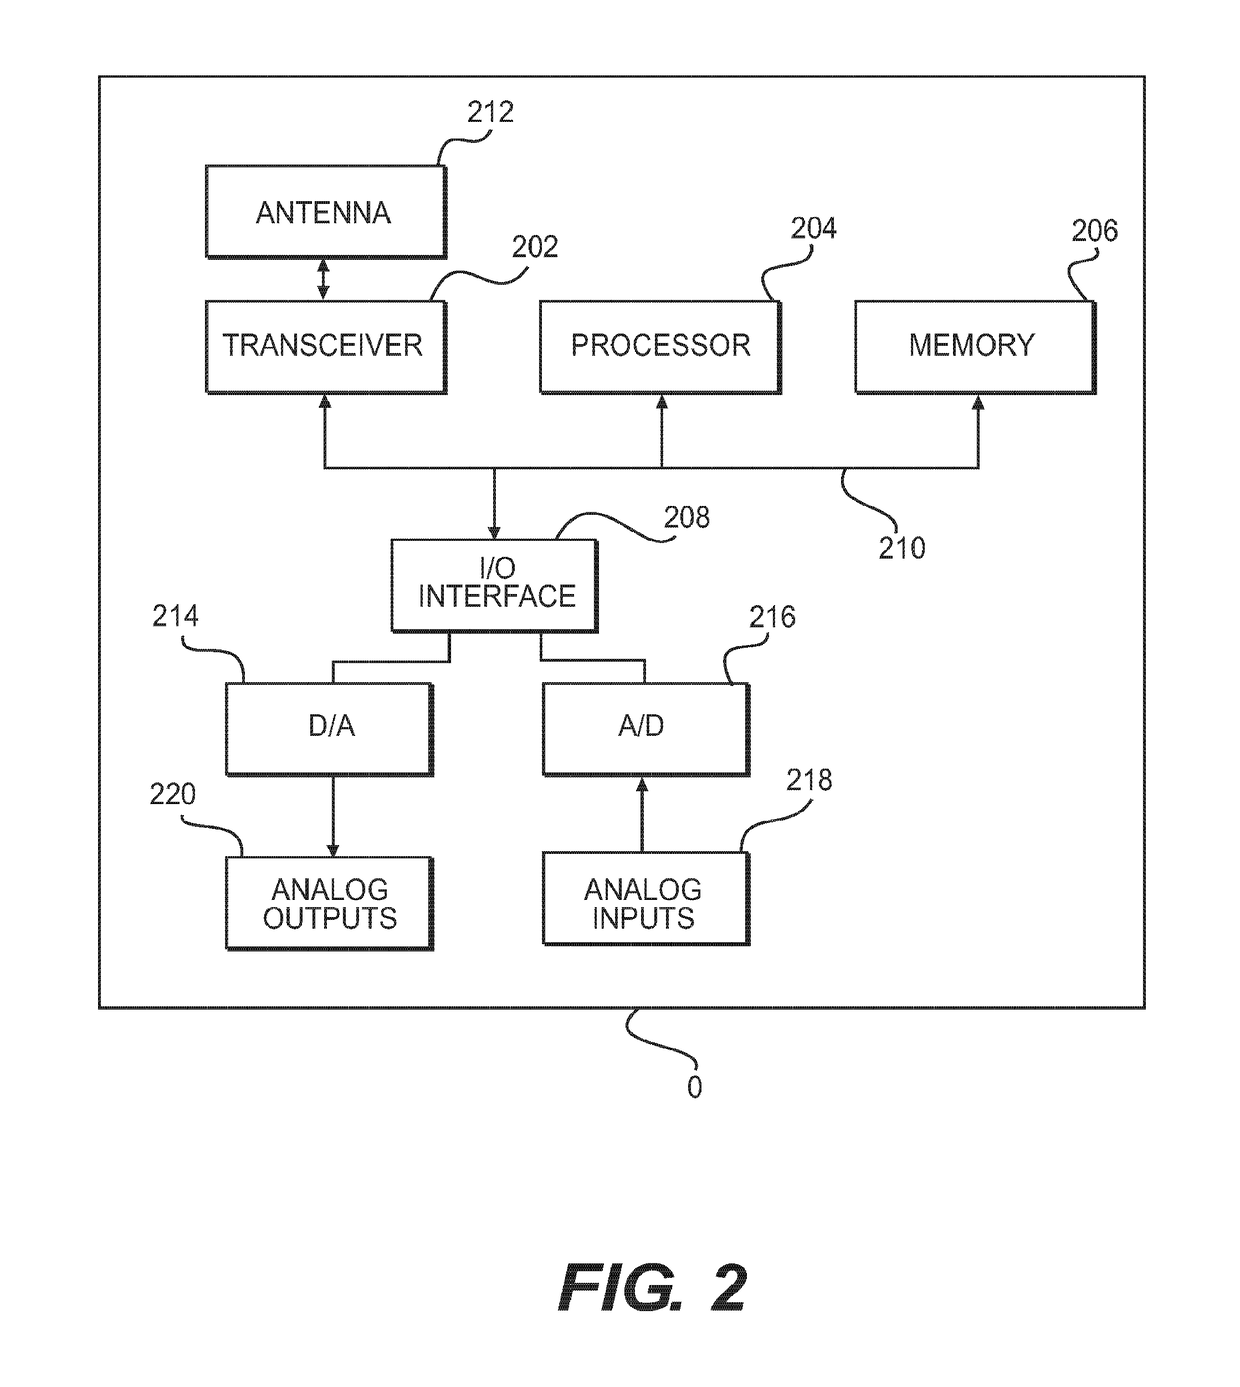 ID-based routing protocol for wireless network with a grid topology